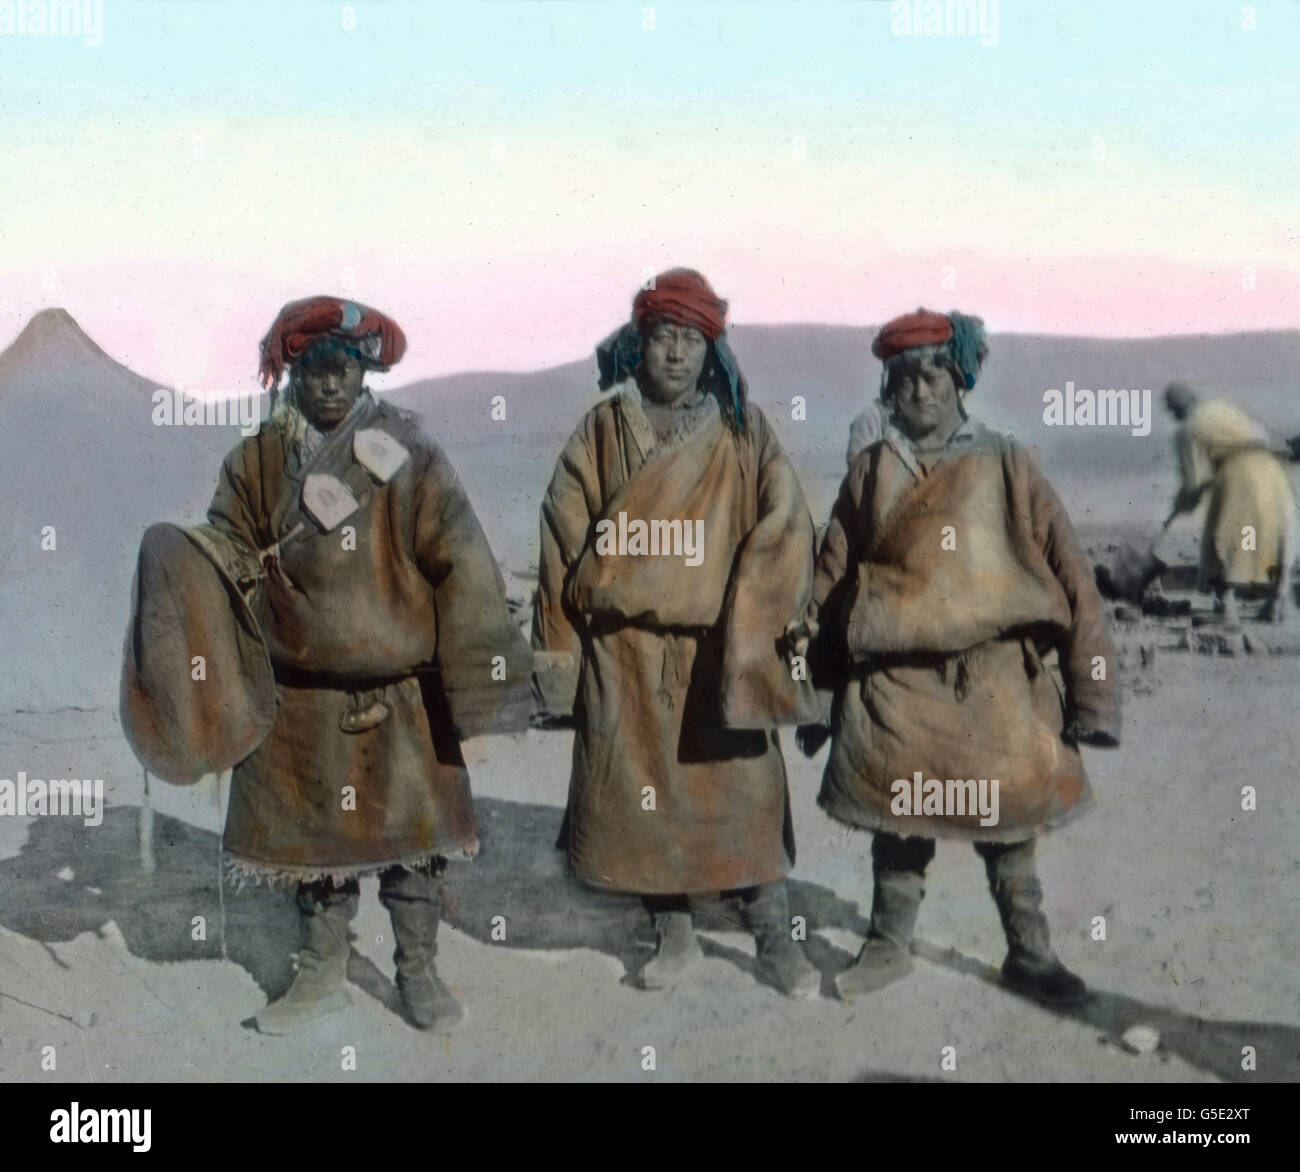 Die Post ist da. The mail messengers have reached the expedition camp. travel, history, historical, 1910s, 20th century, archive, Carl Simon, hand coloured glass slide, men, native, mail, postman, messenger, message, communication, camp, mountains, Asia, Asian, native, Tibet Stock Photo